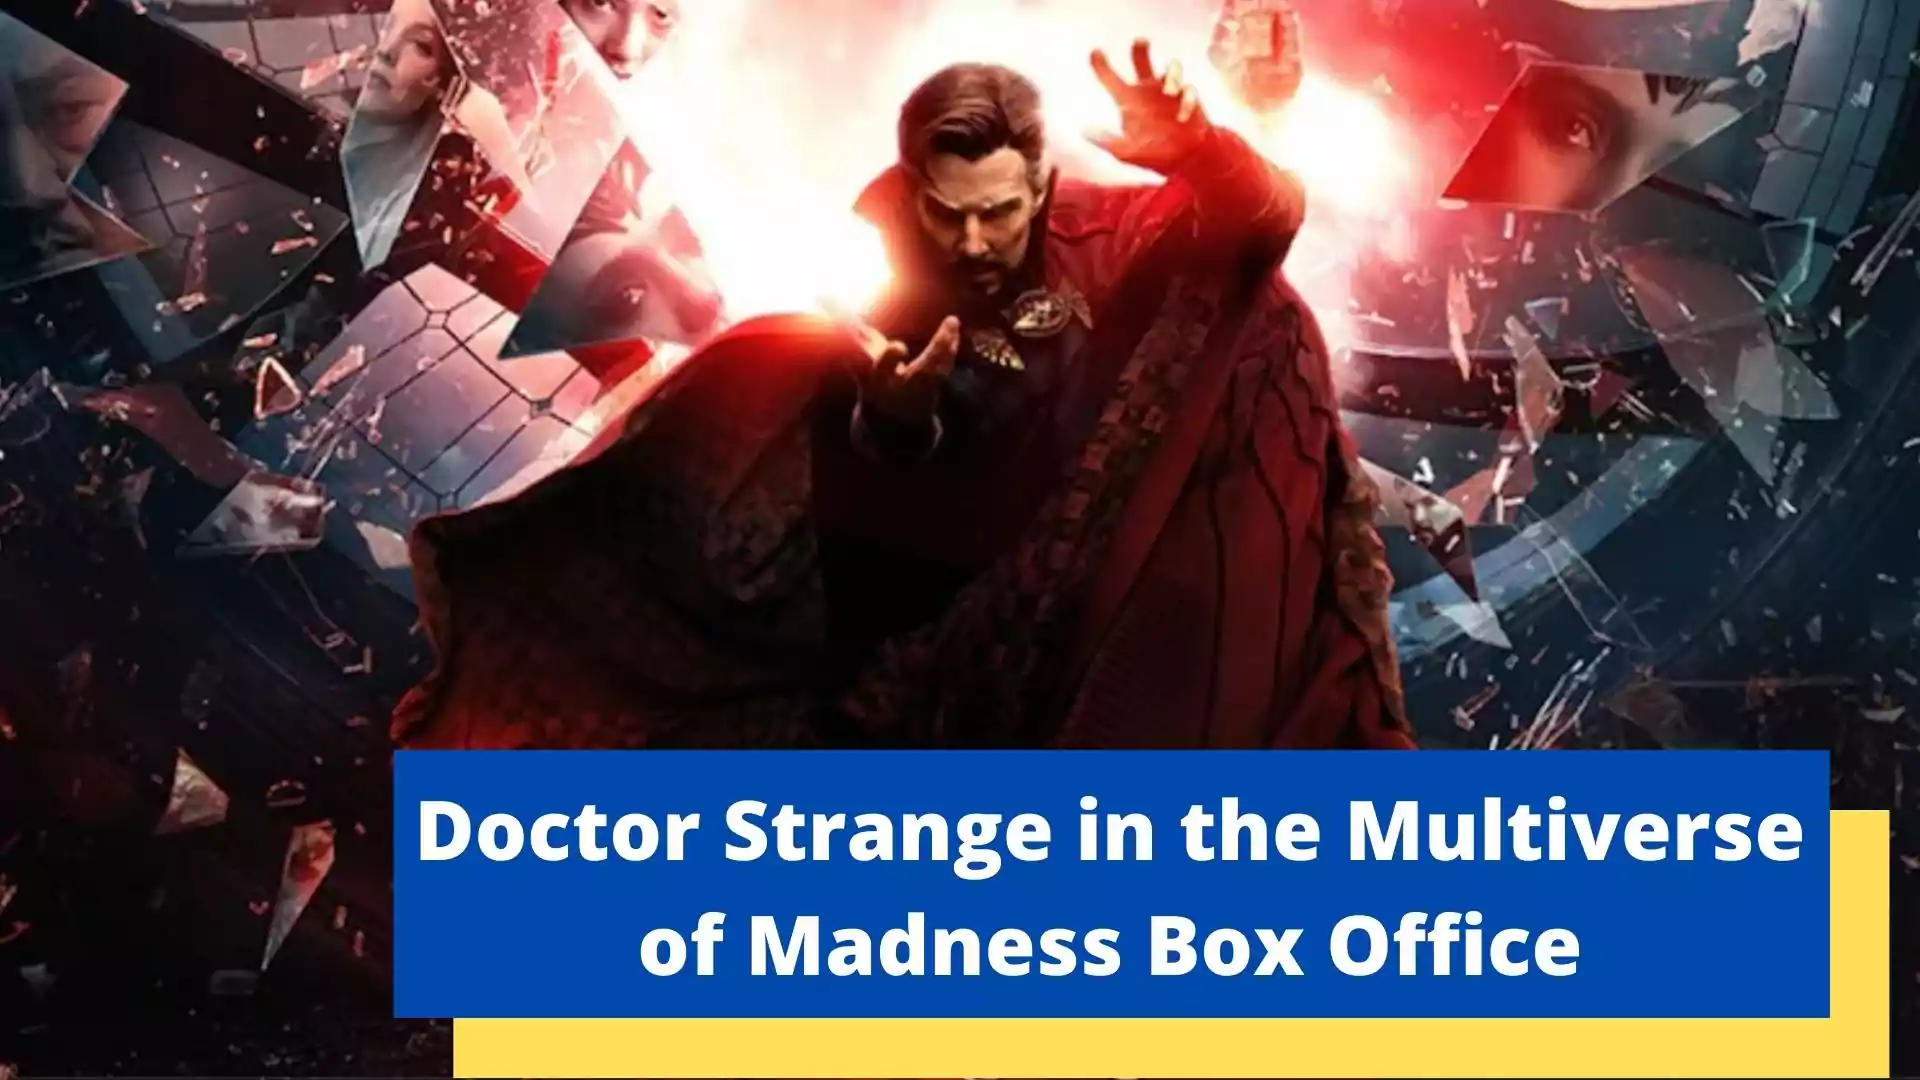 Doctor Strange in the Multiverse of Madness Box Office.